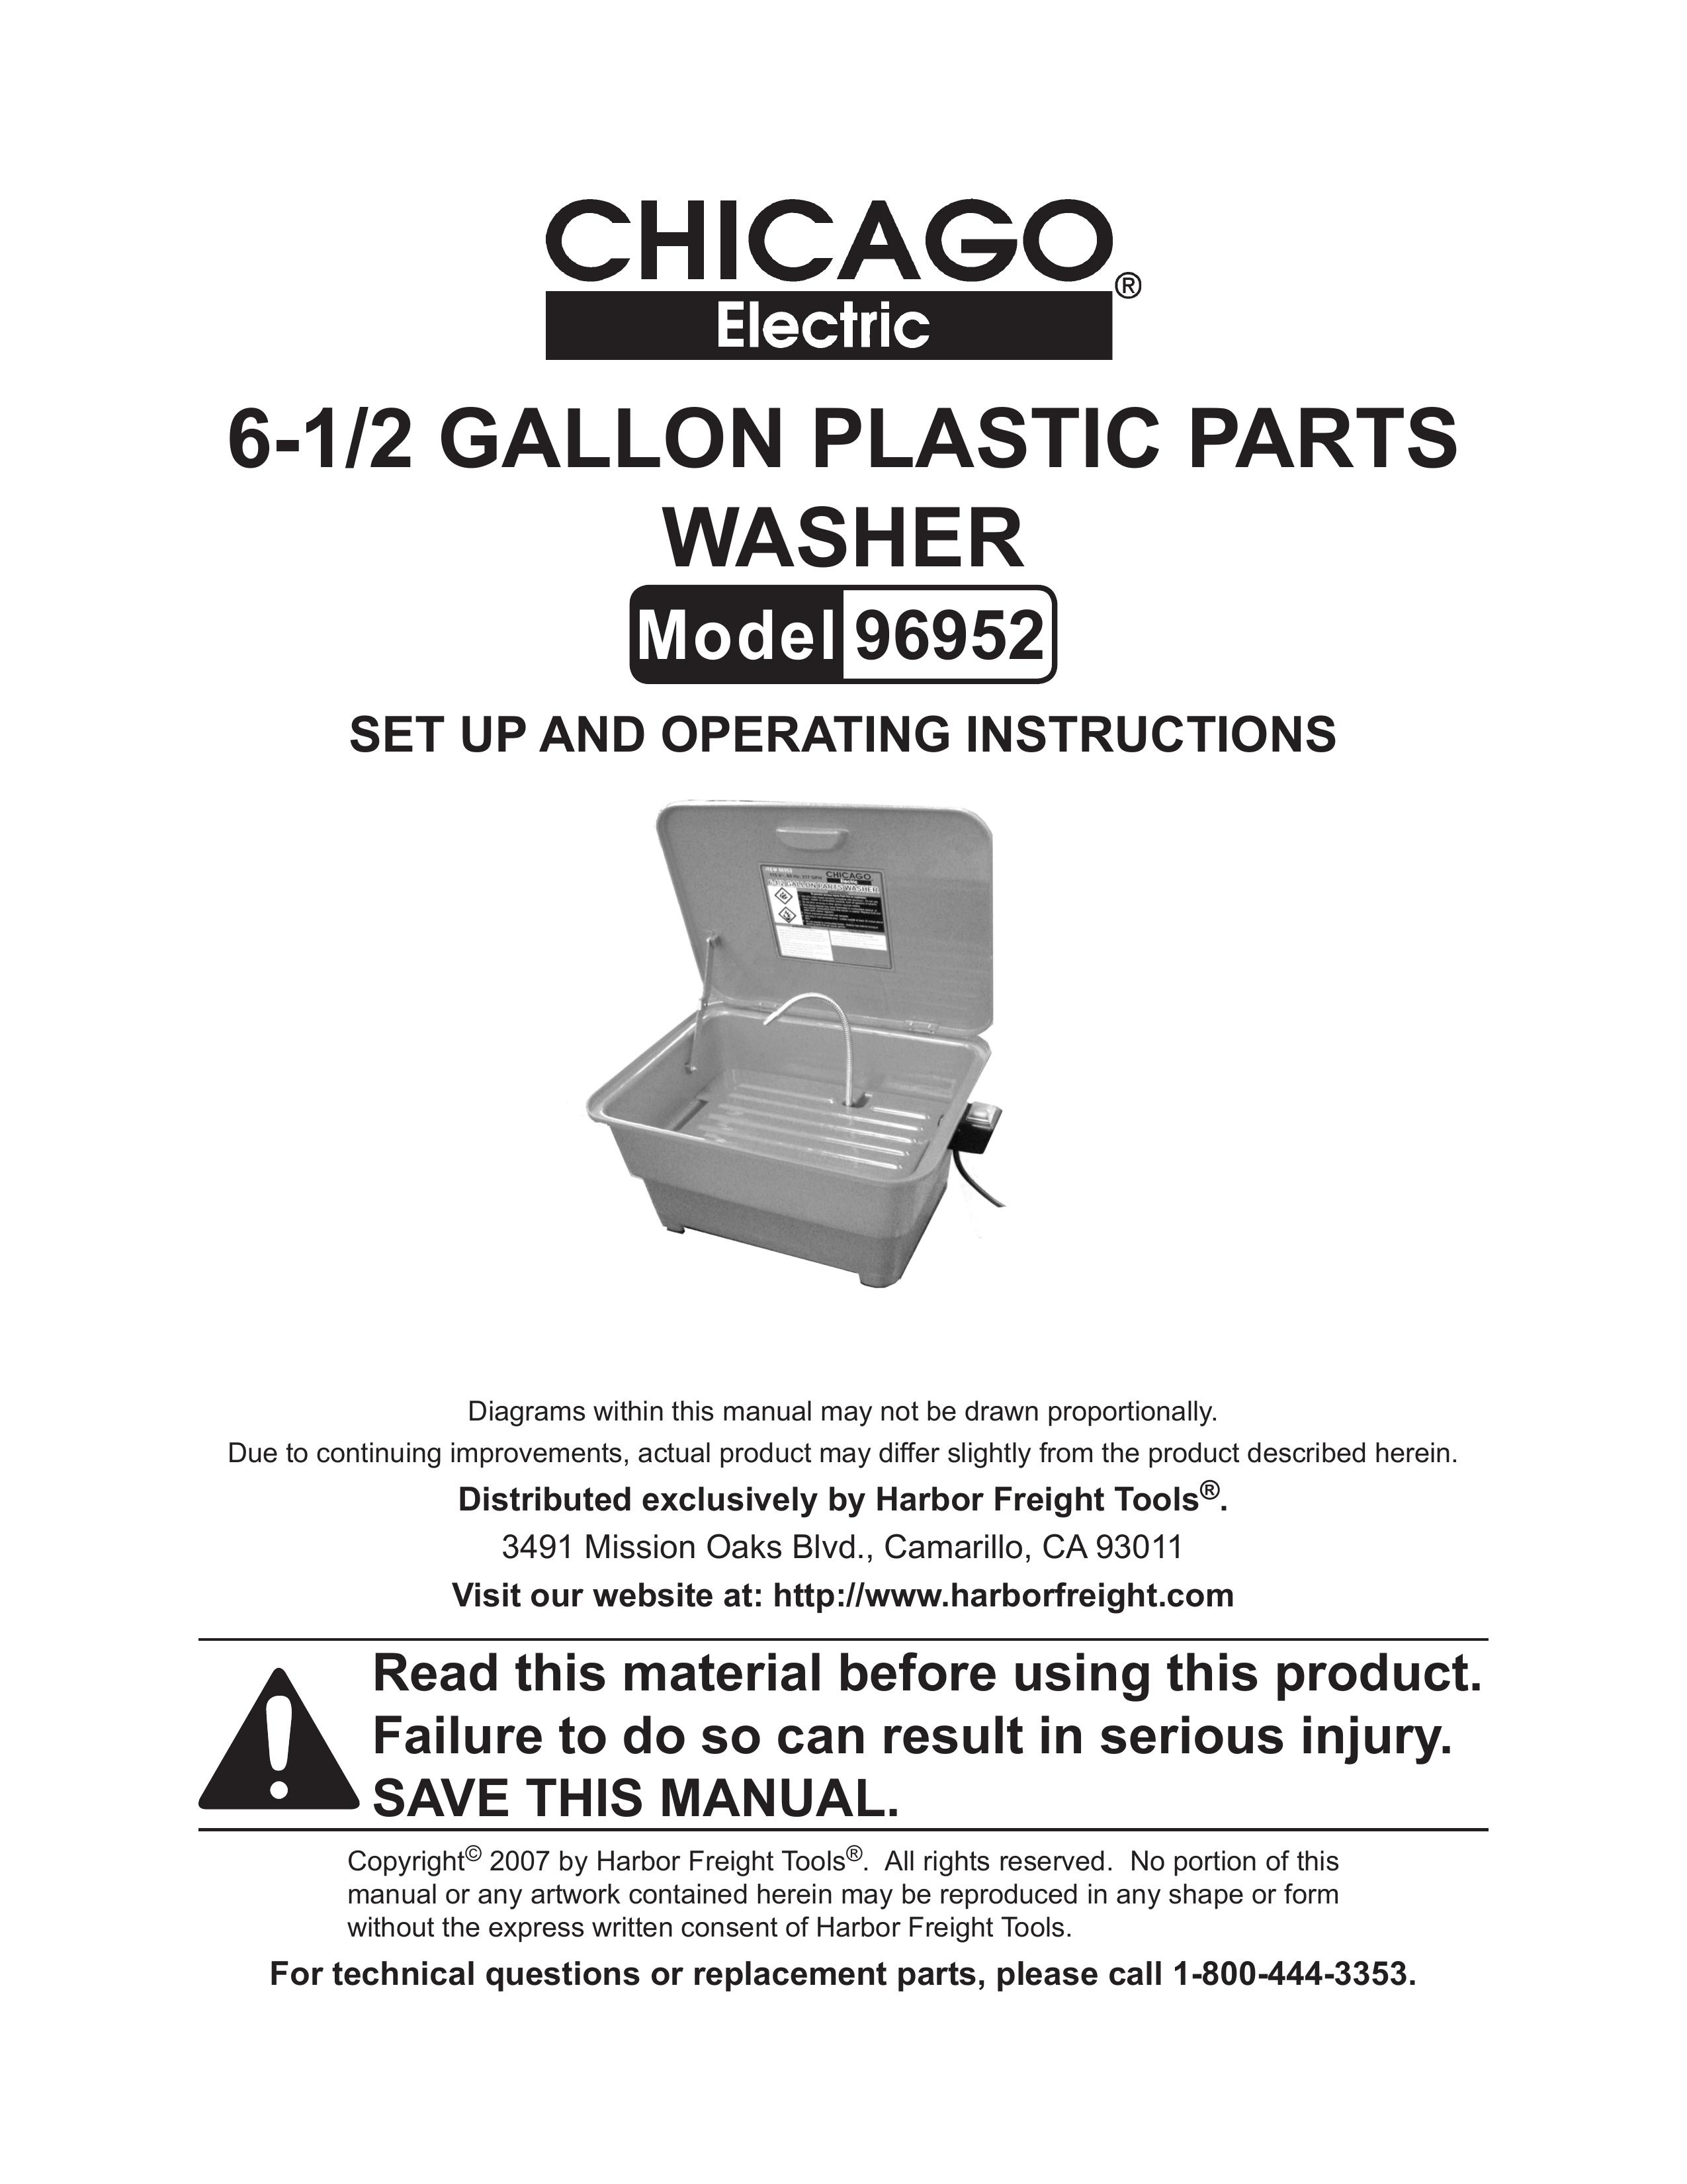 Chicago Electric 96952 Washer User Manual